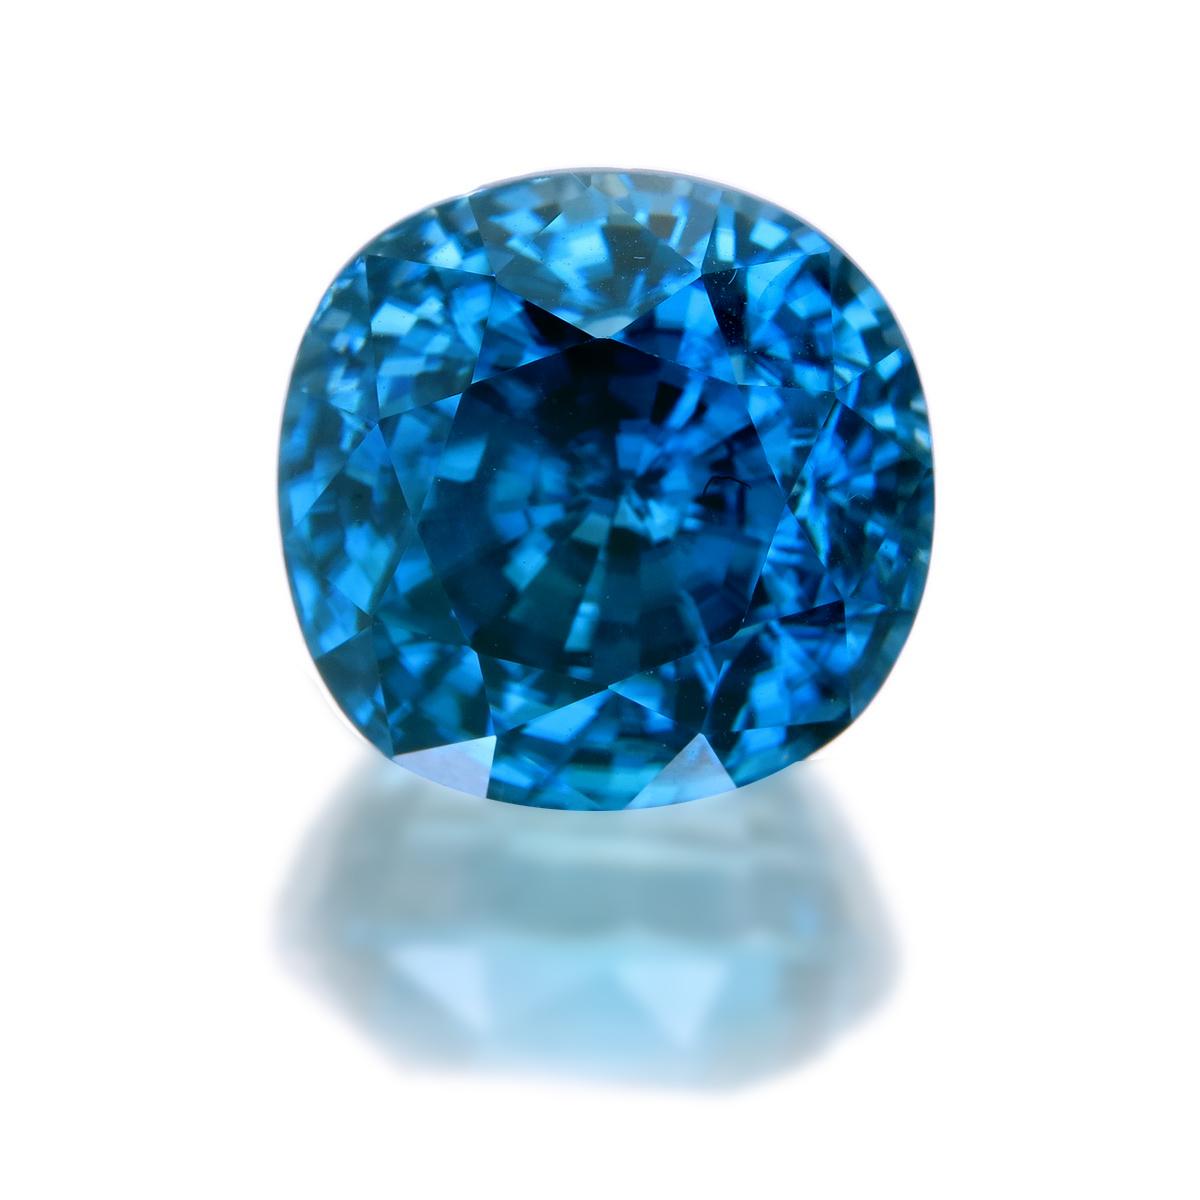 Collectors Item:
17.03 carat Natural Blue Zircon from Ratanakiri, Cambodia.
Blue zircons this high quality we have decided to give the title of 'Azure Blue' due to it being imbued with a tremendous deep blue color but shows full vivid blue